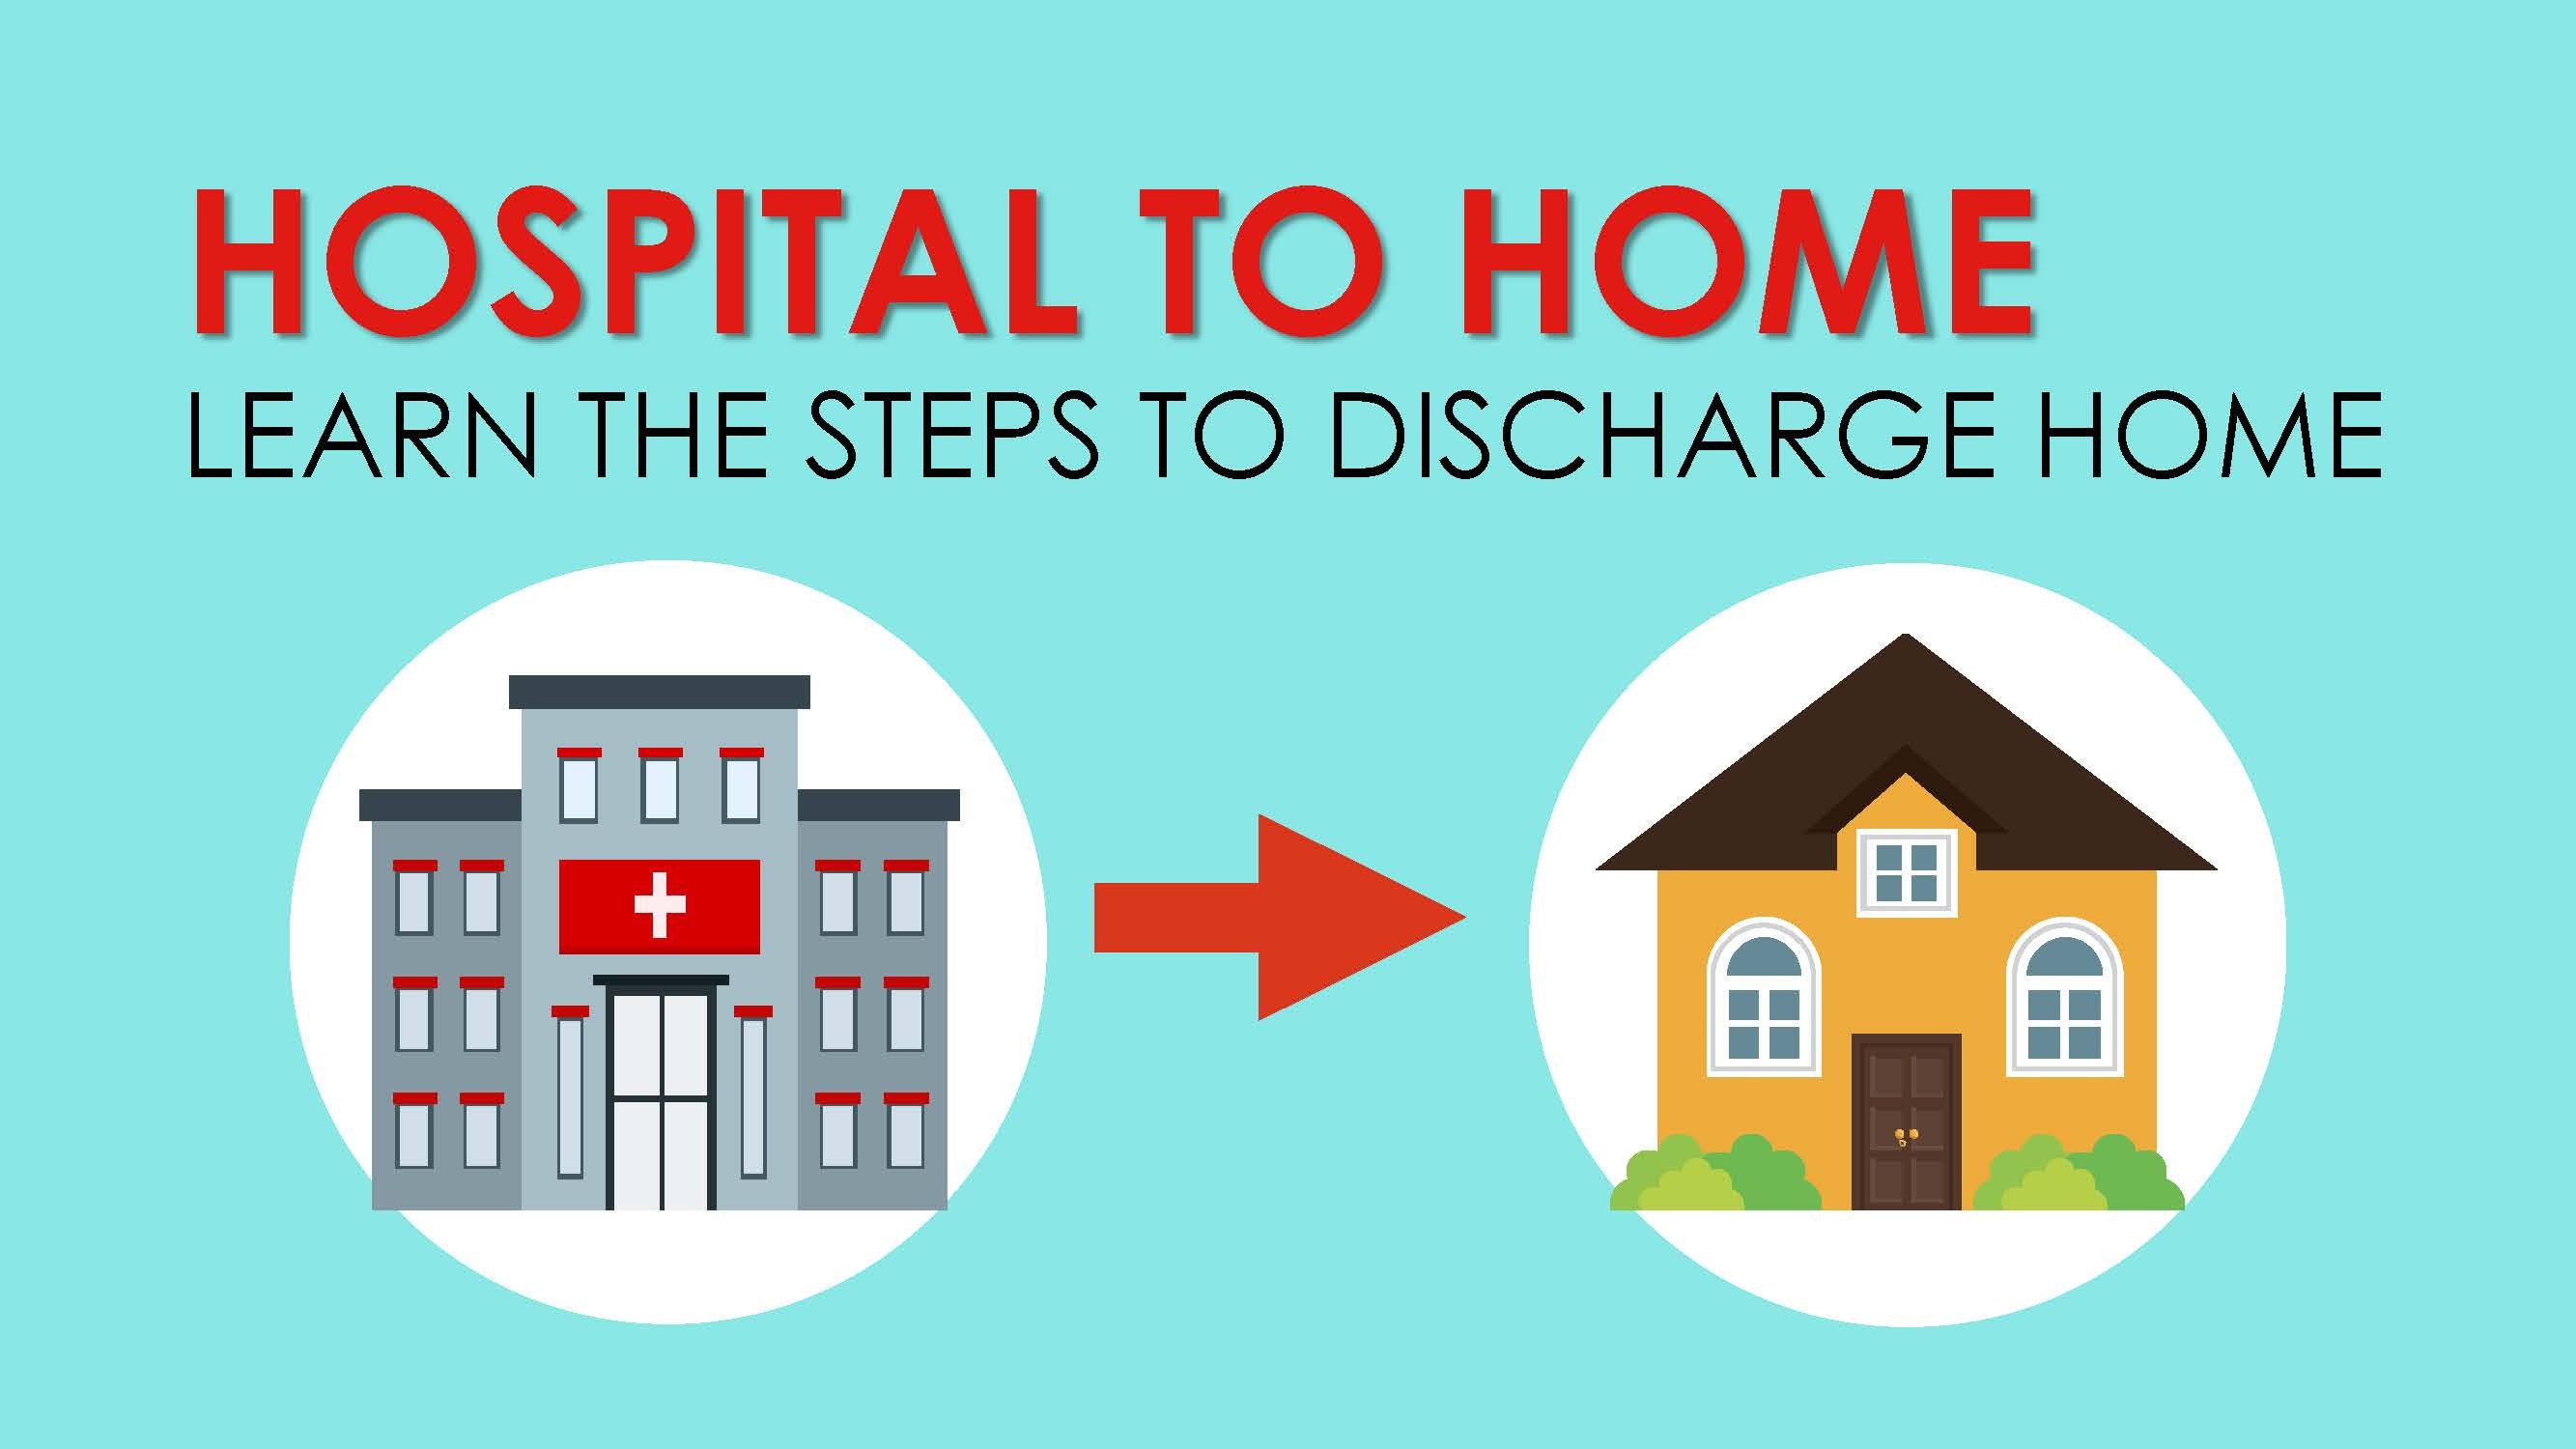 home visits after discharge from hospital